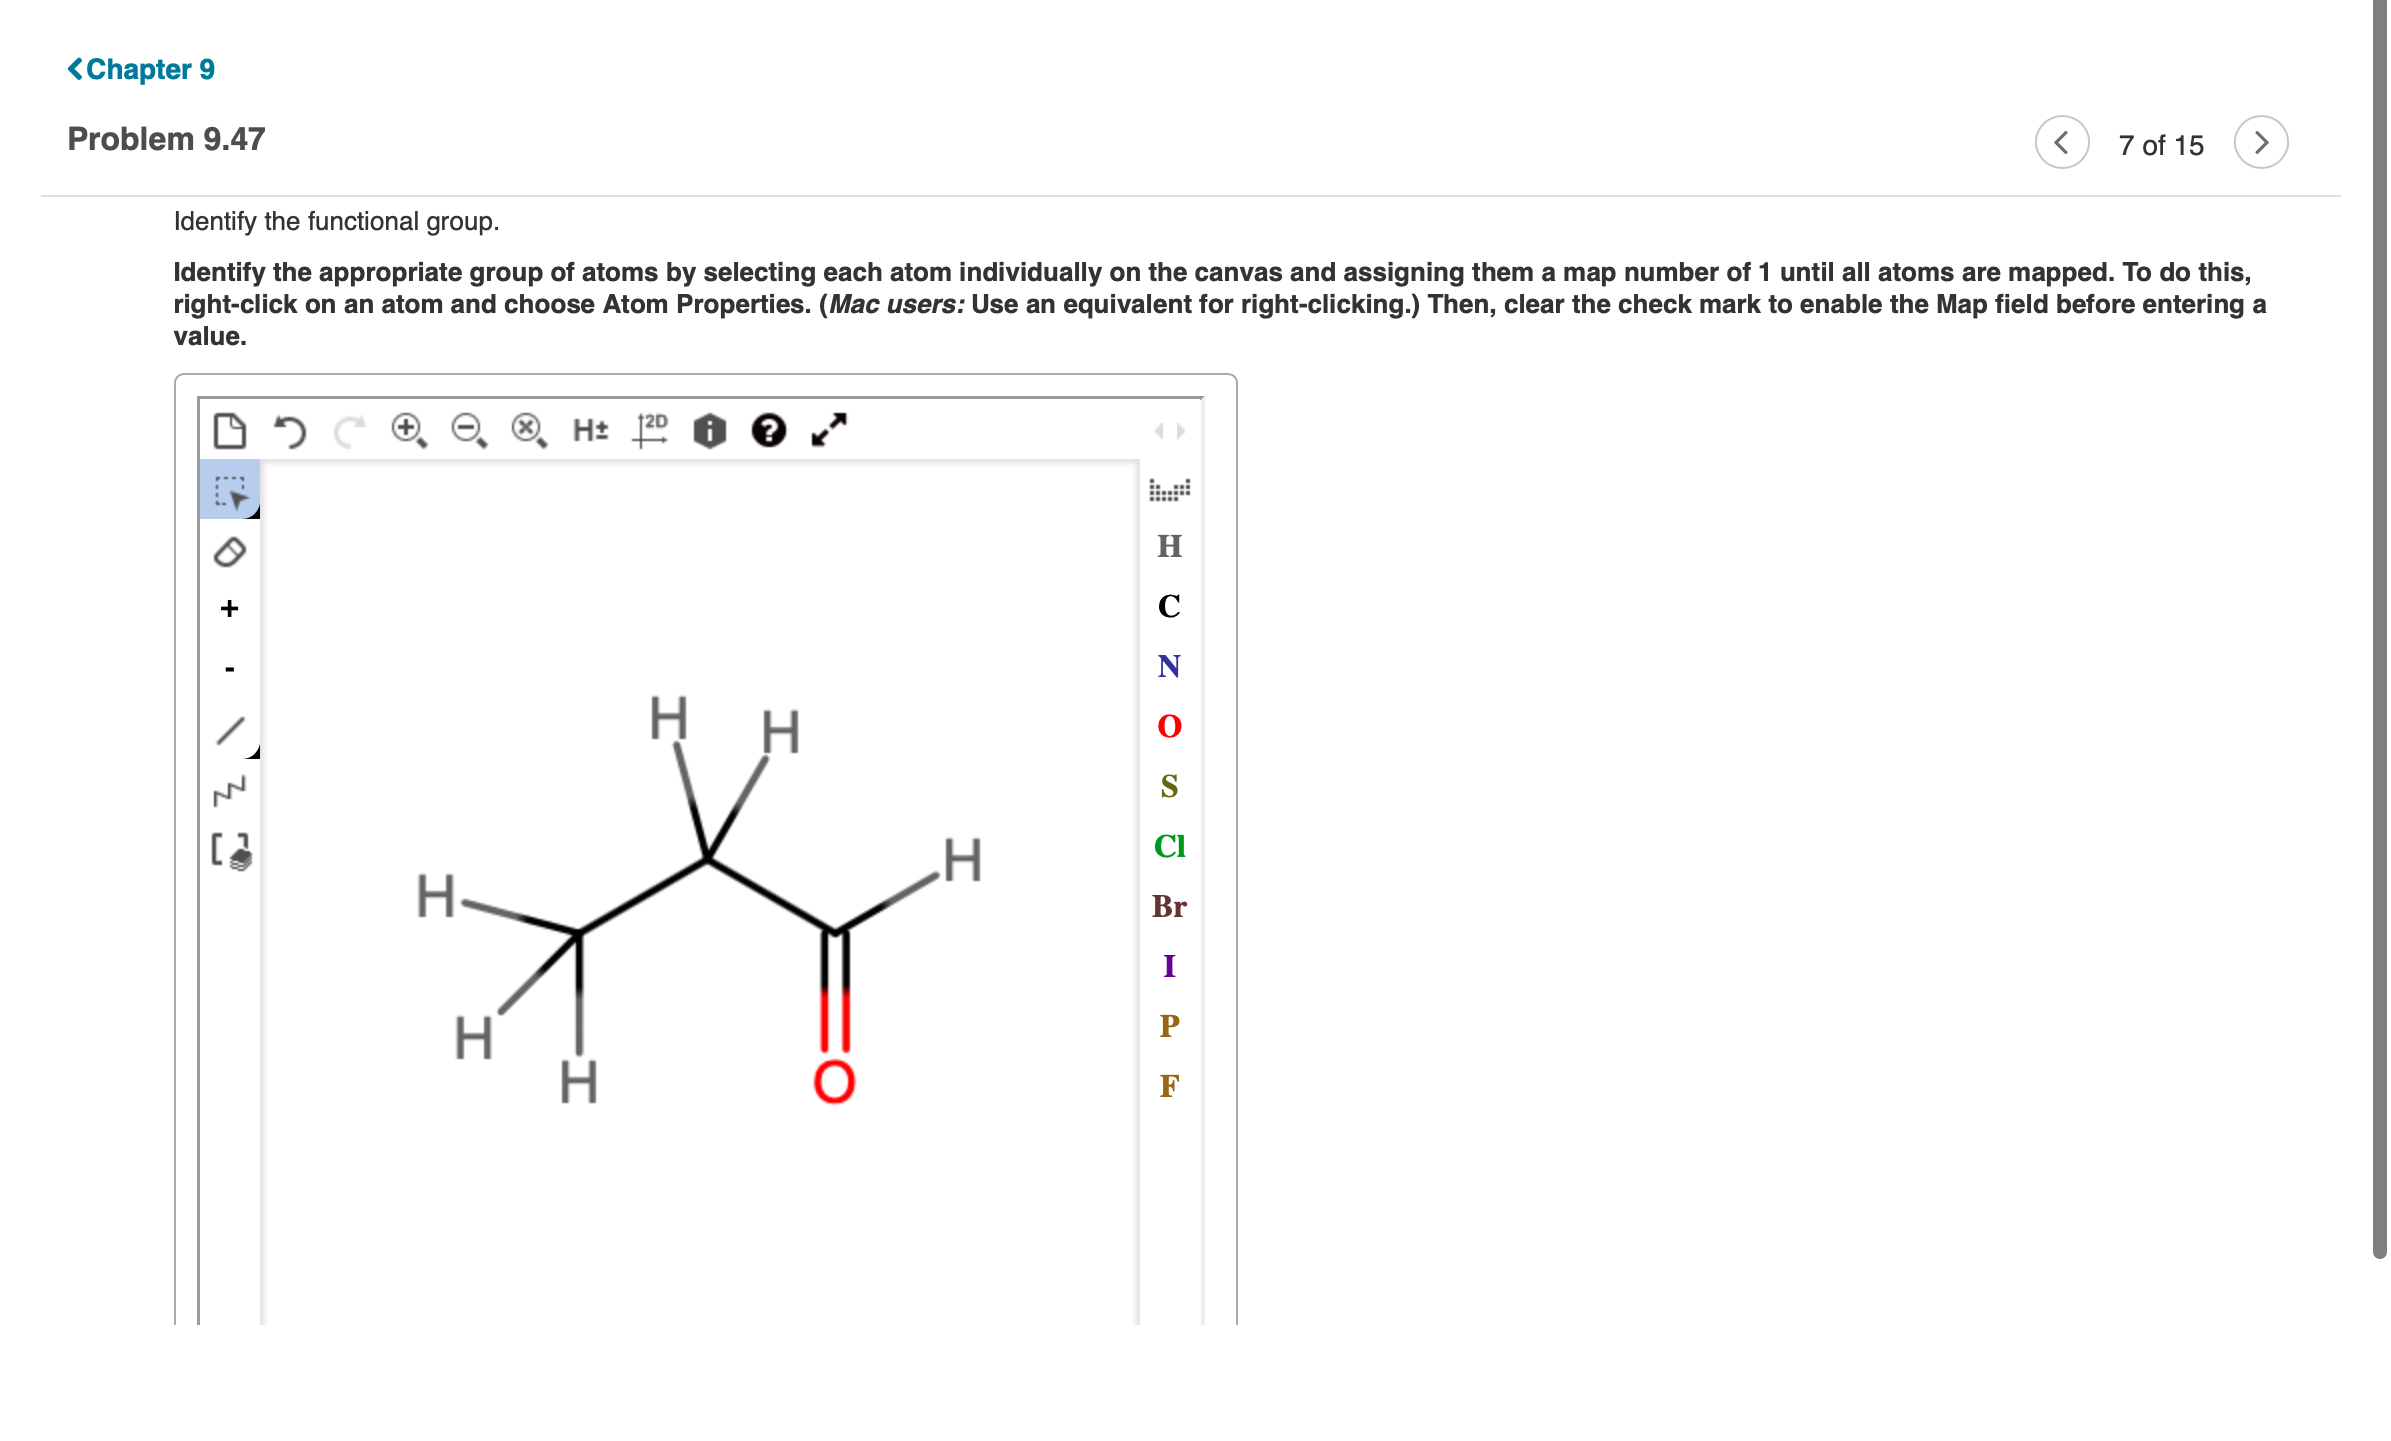 <Chapter 9
Problem 9.47
7 of 15
Identify the functional group.
Identify the appropriate group of atoms by selecting each atom individually on the canvas and assigning them a map number of 1 until all atoms are mapped. To do this,
right-click on an atom and choose Atom Properties. (Mac users: Use an equivalent for right-clicking.) Then, clear the check mark to enable the Map field before entering a
value.
H 120 2
н
C
N
H H
CI
H
H-
Br
I
Н
P
F
로그
